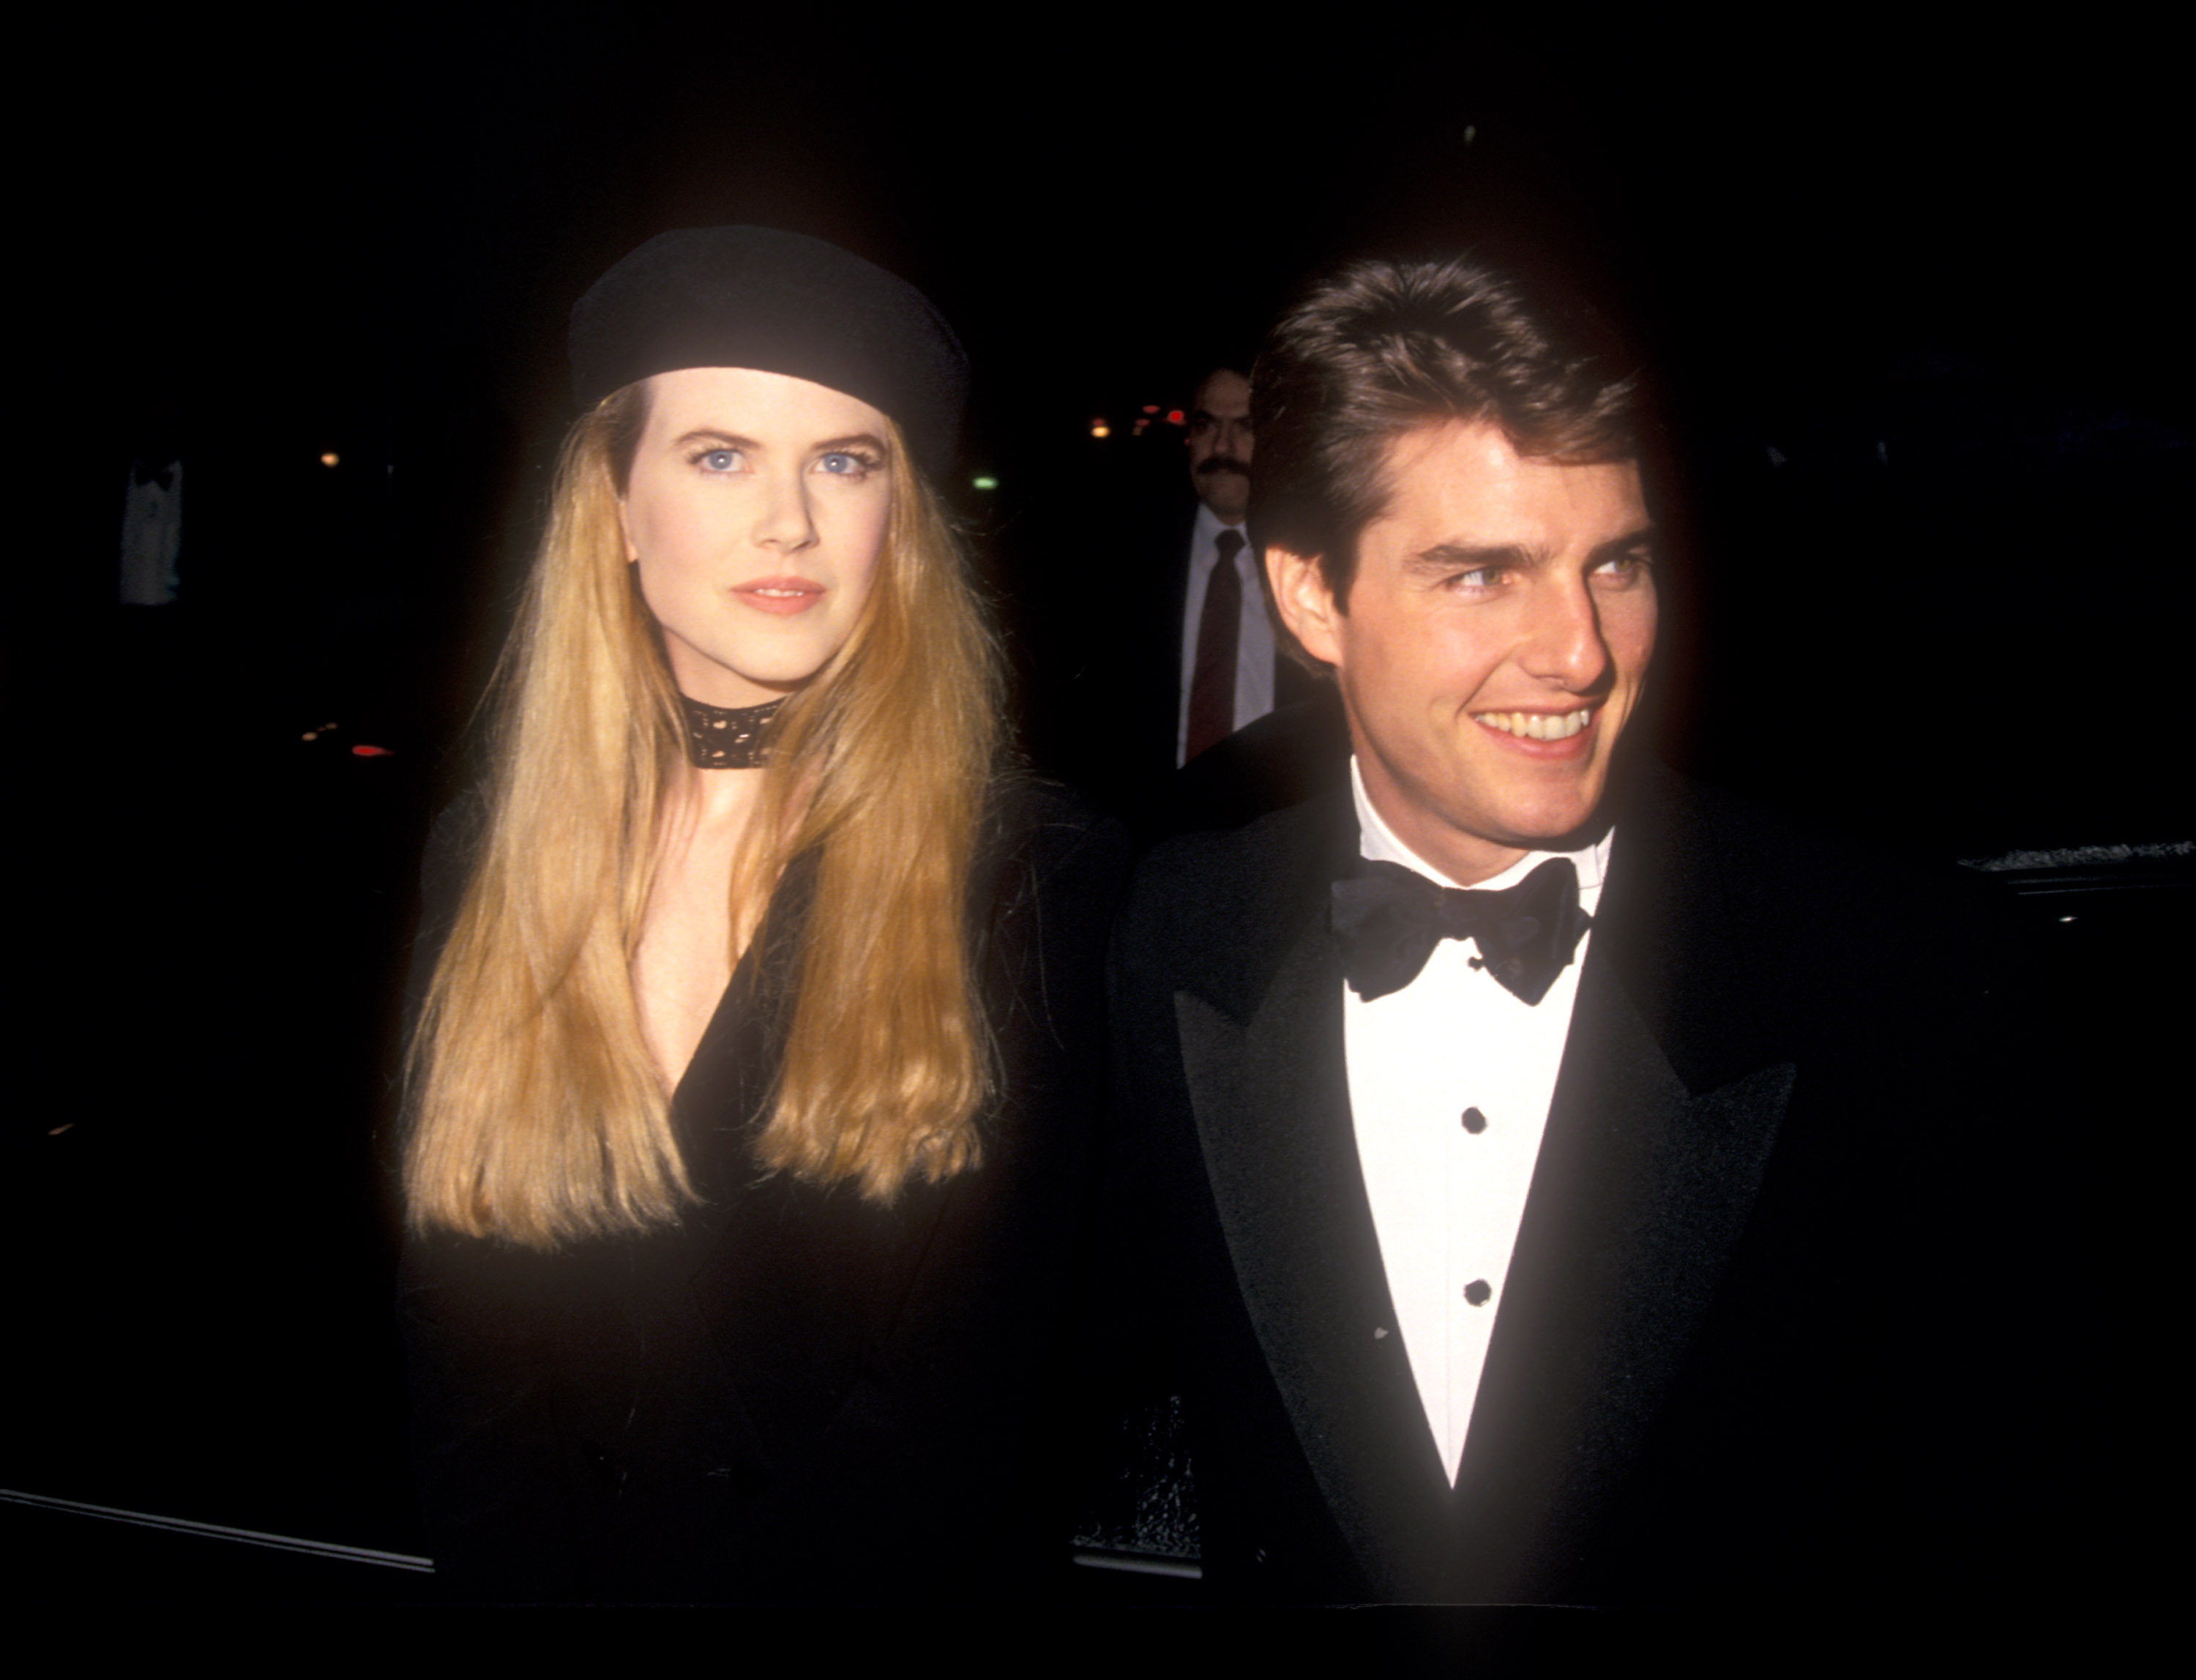 Nicole Kidman Says Marrying Tom Cruise Stopped Her Being Sexually Harassed